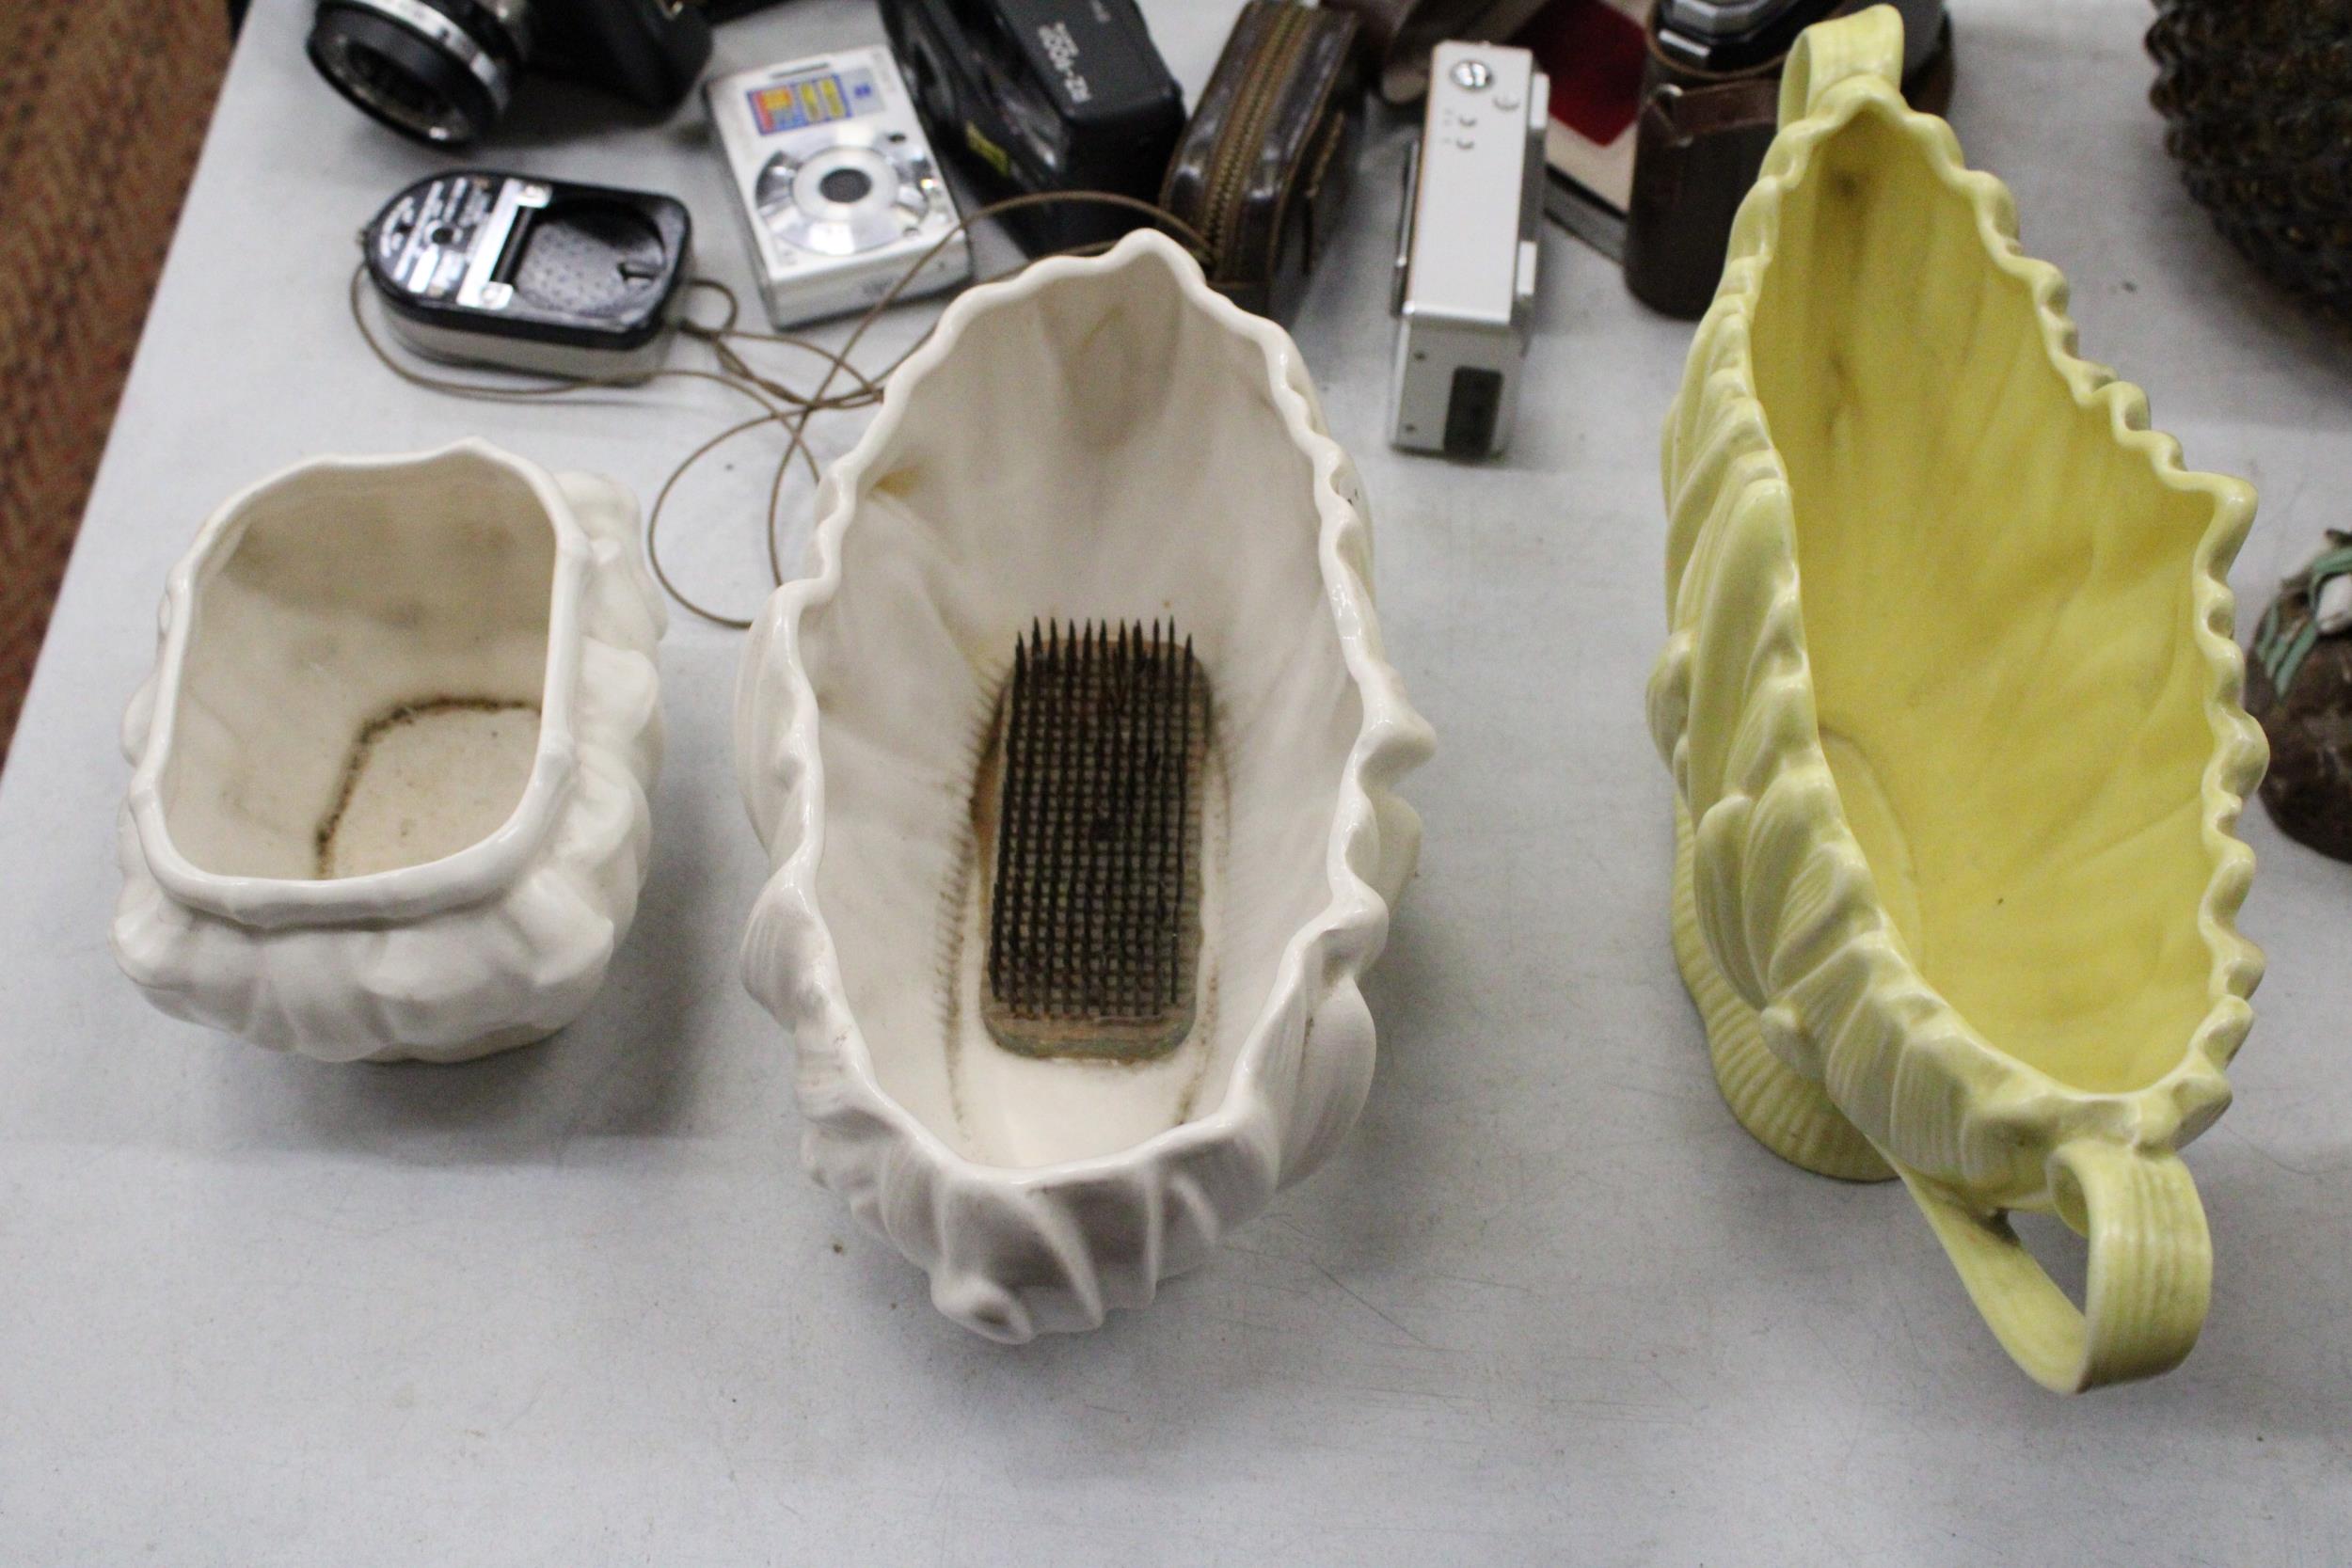 THREE VINTAGE SLYVAC PLANTERS TO INCLUDE PRIMROSE YELLOW - Image 6 of 6